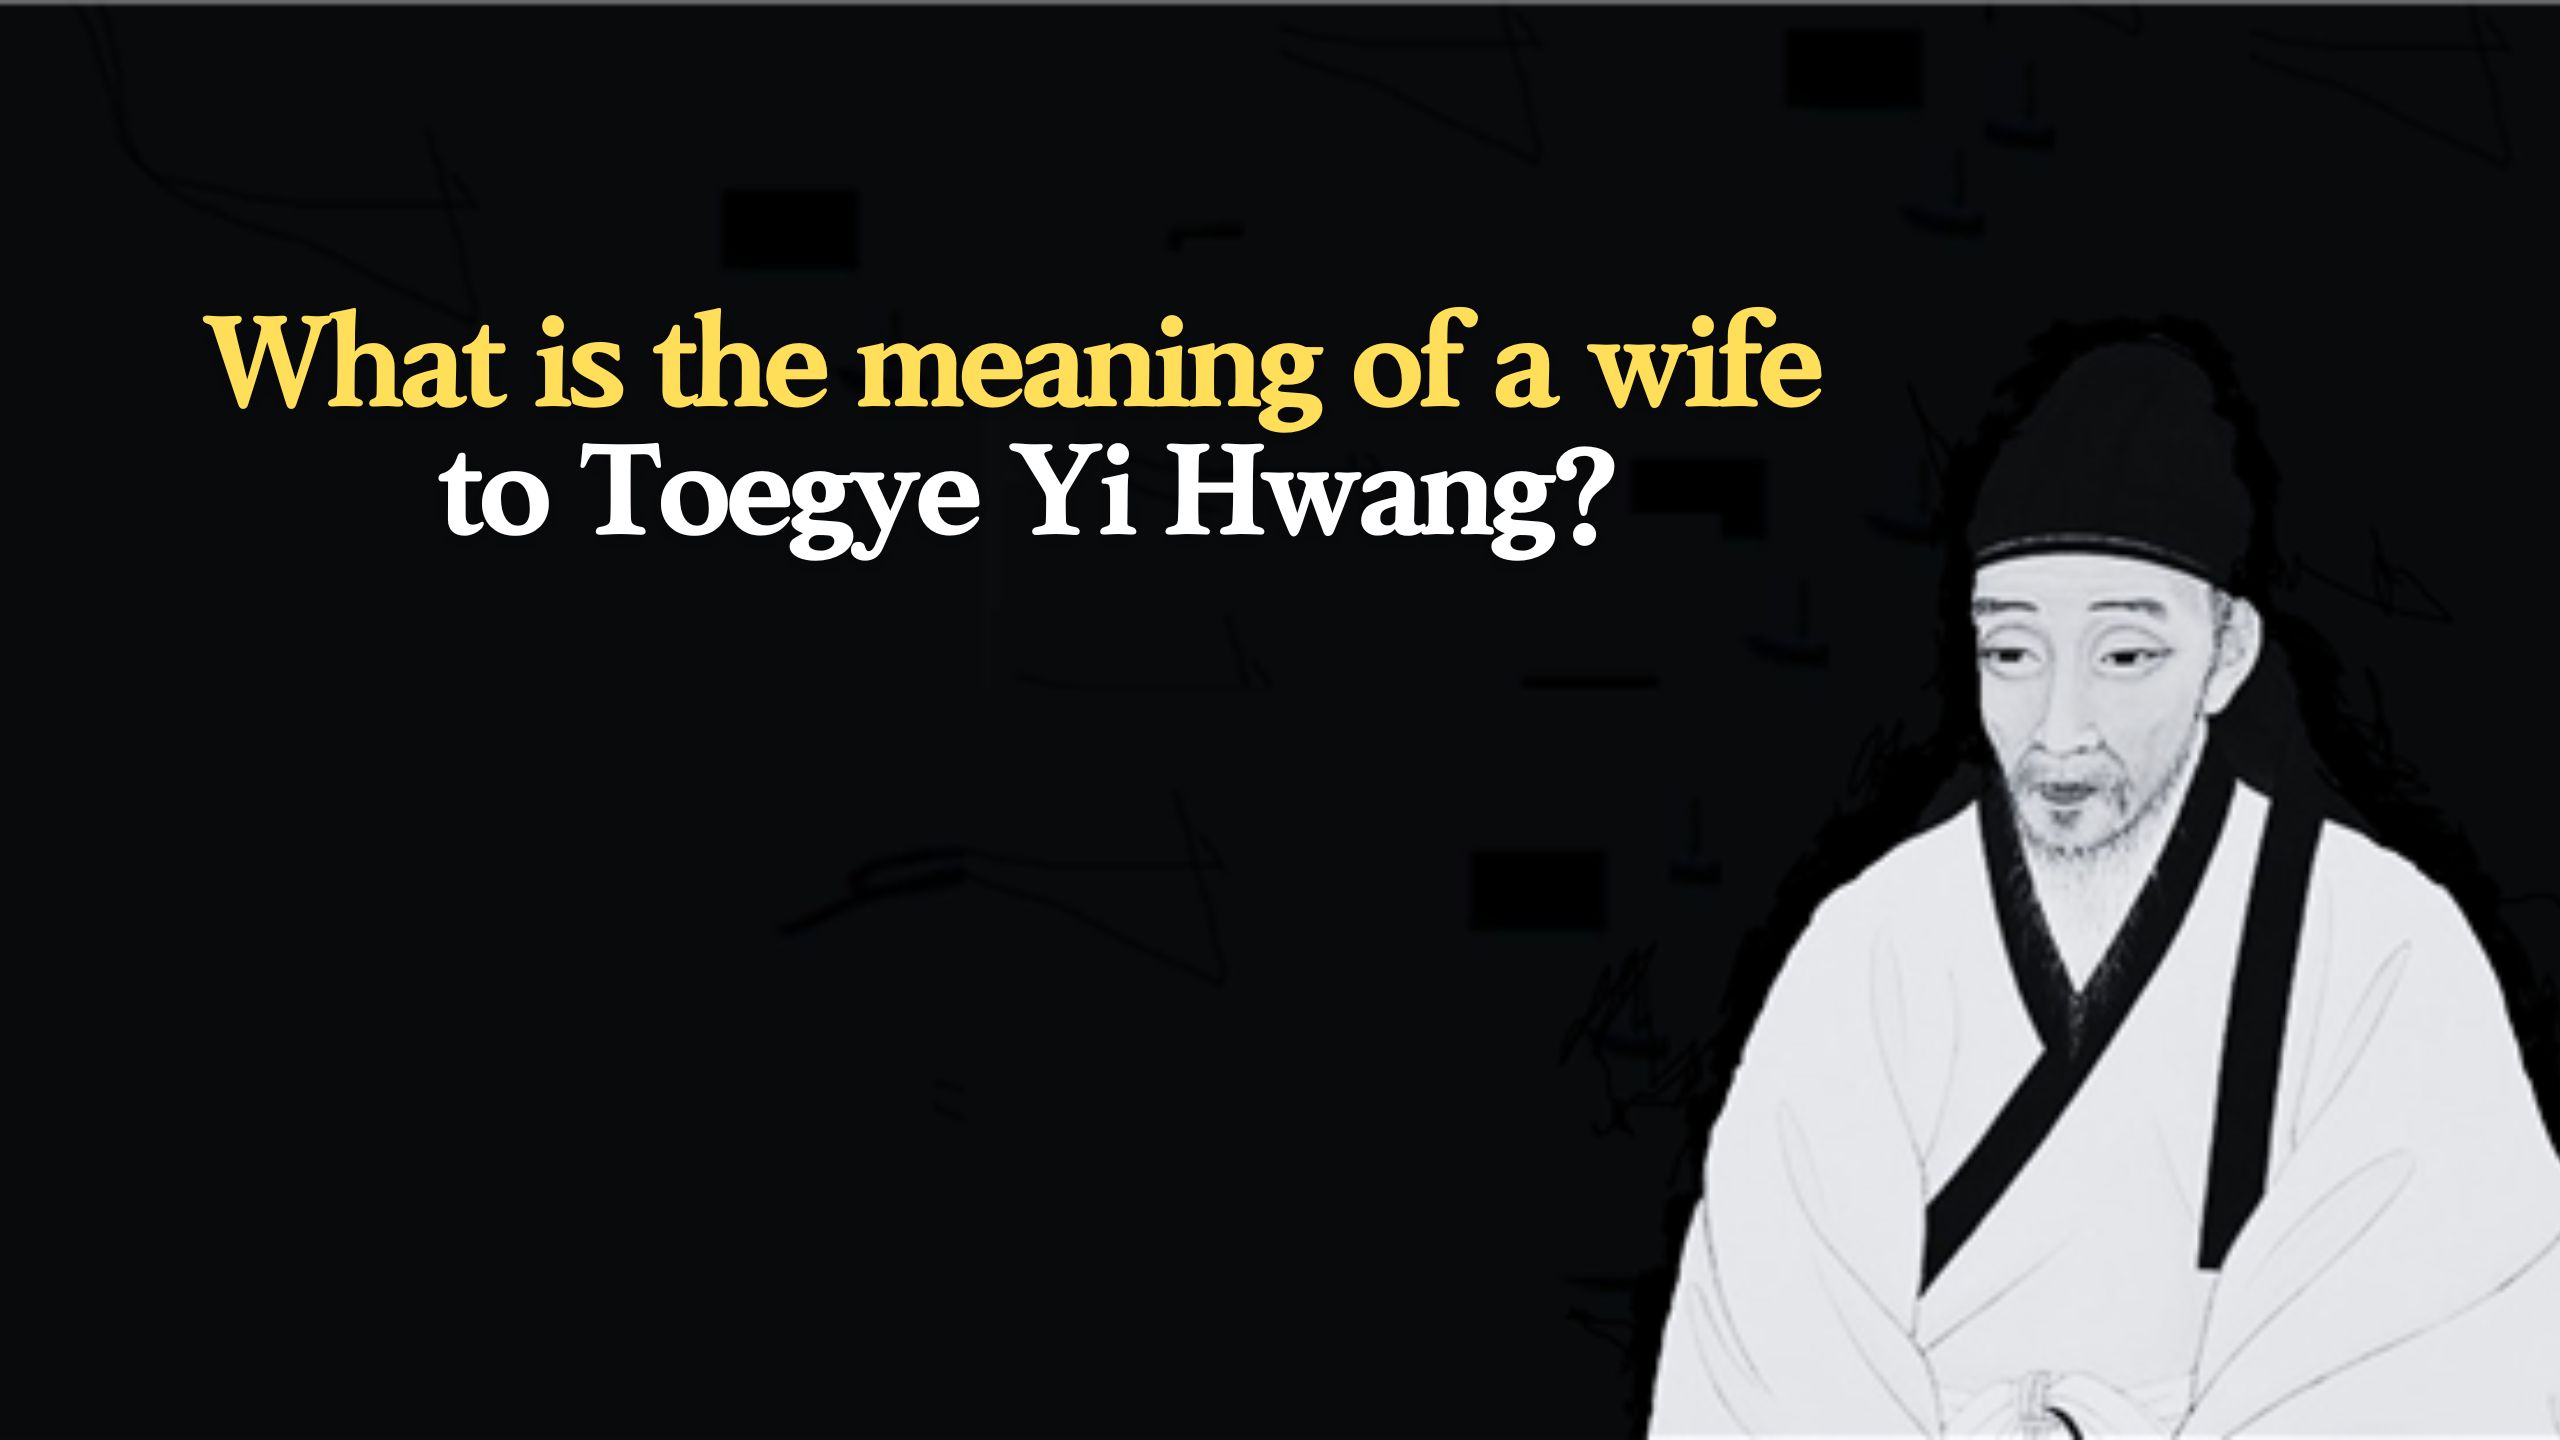 What is the meaning of a wife to Toegye Yi Hwang